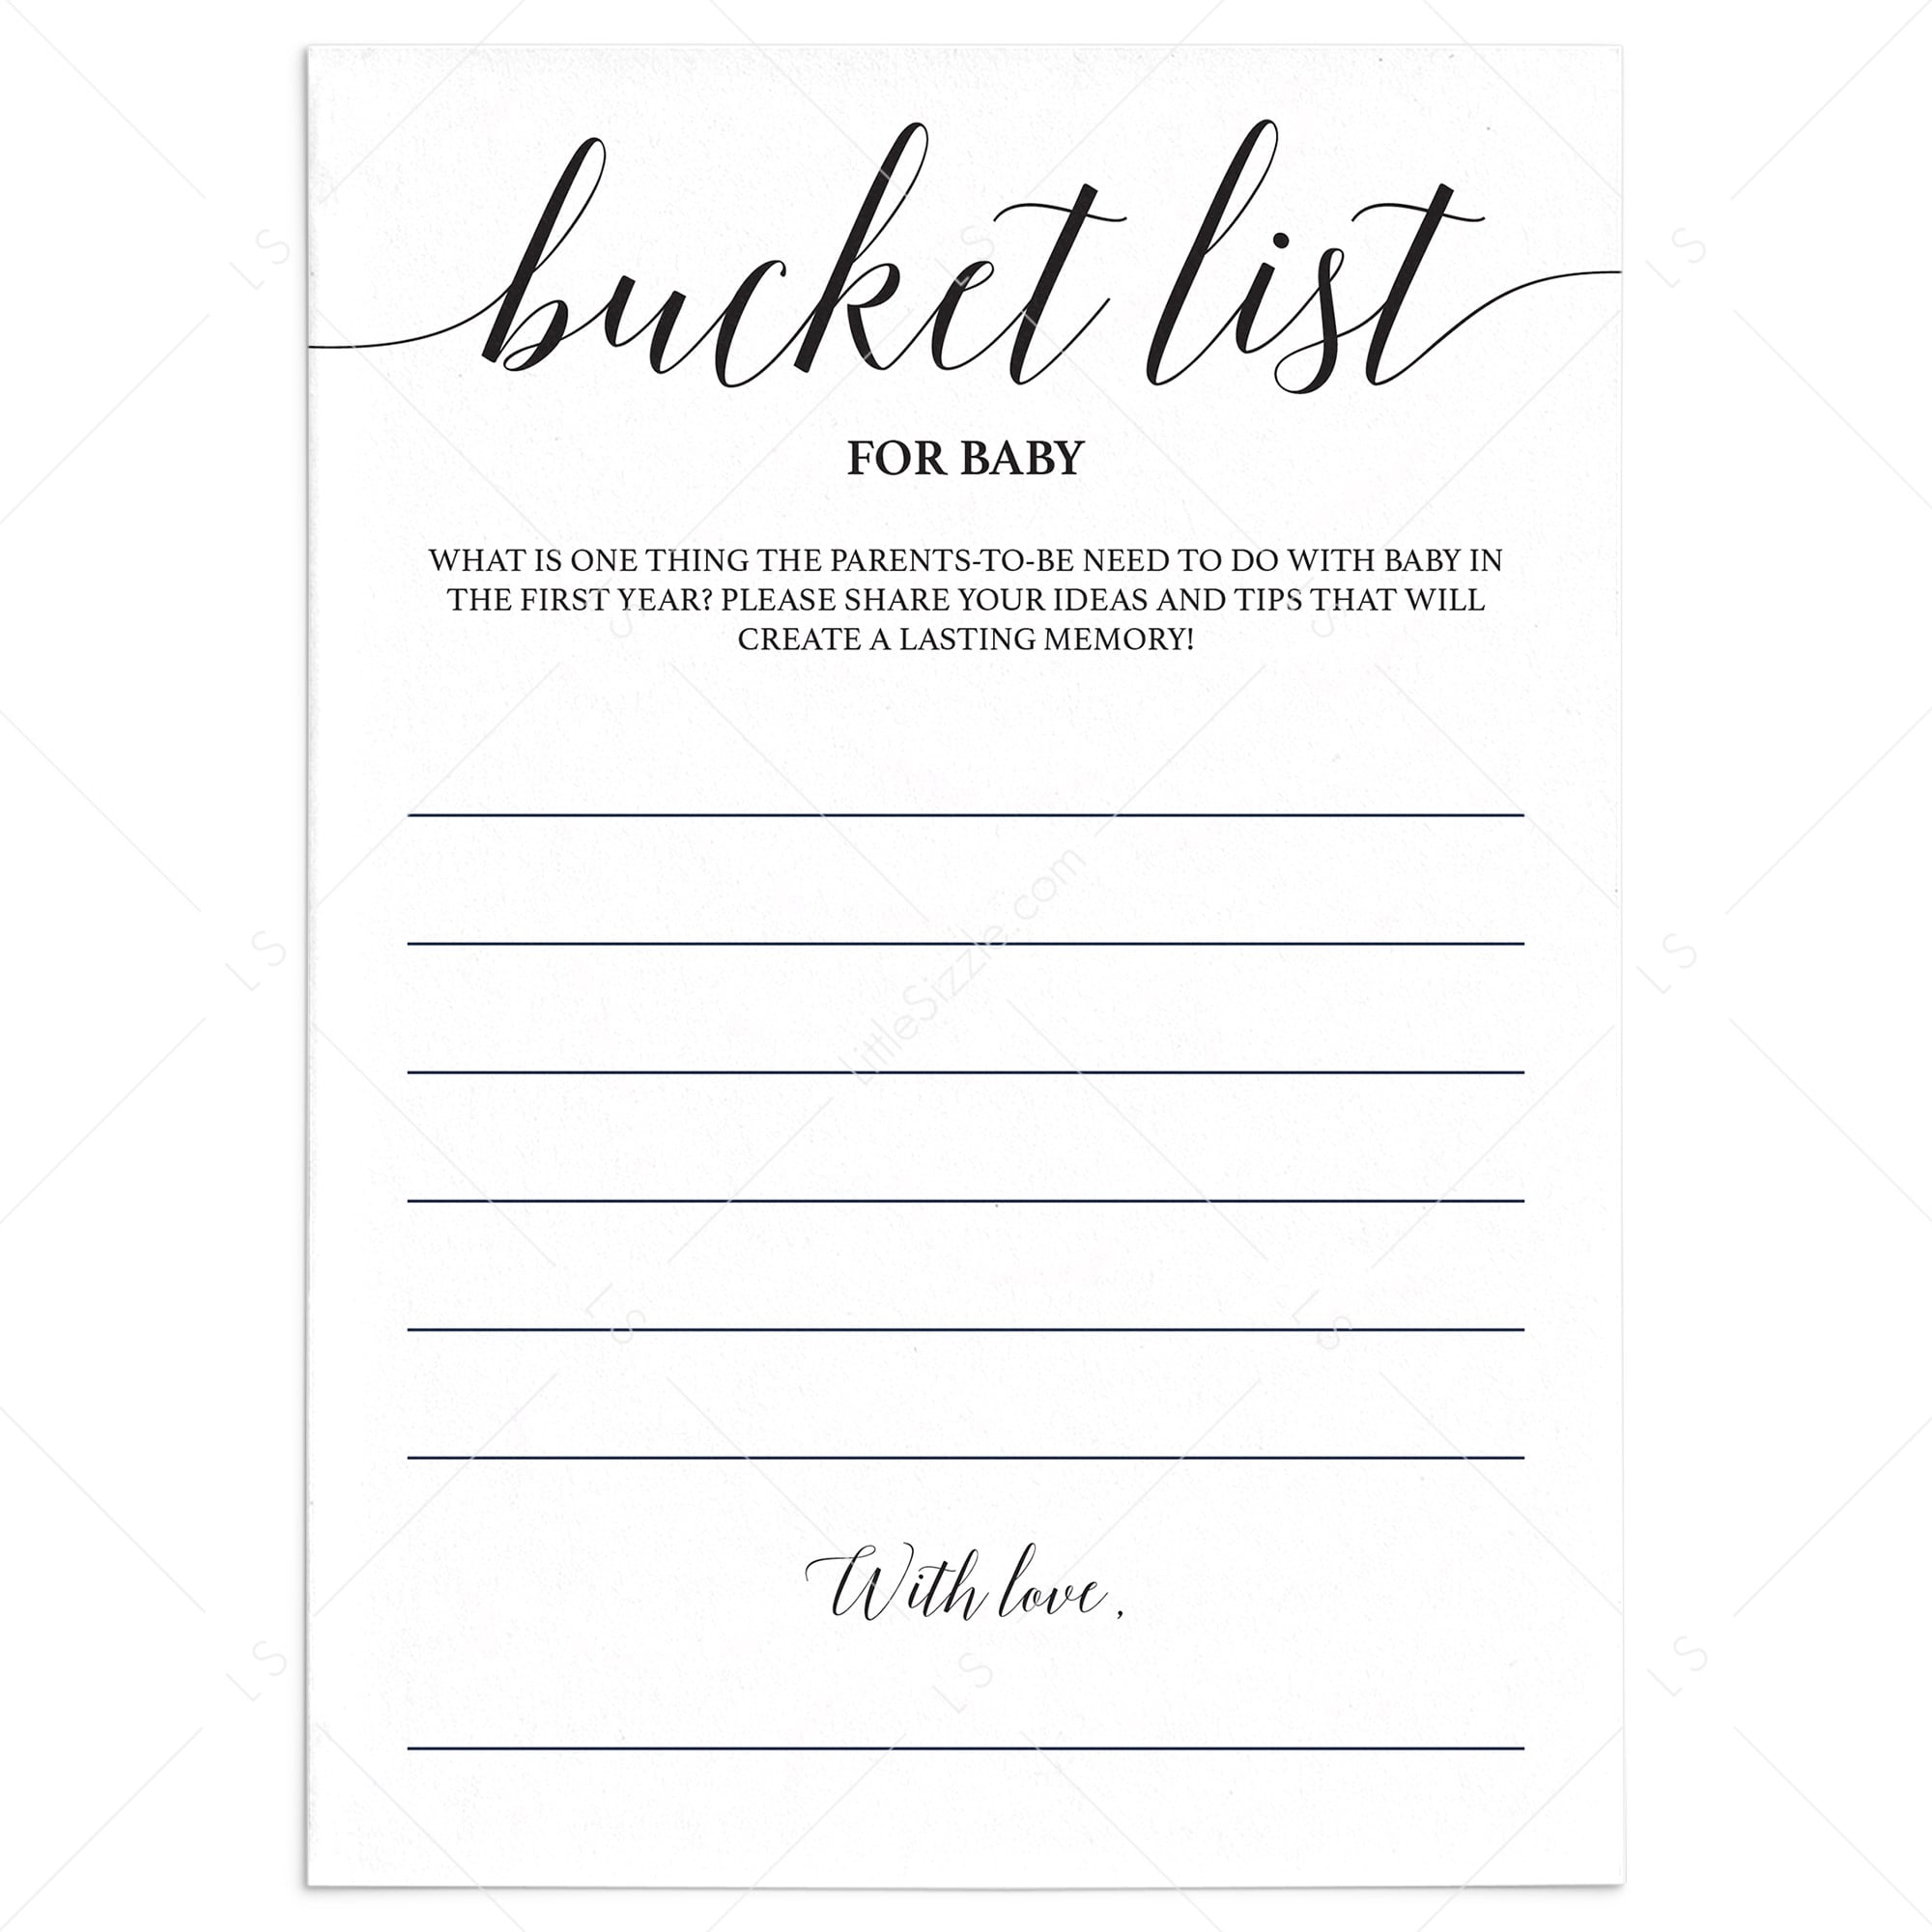 Bucket list for baby cards by LittleSizzle